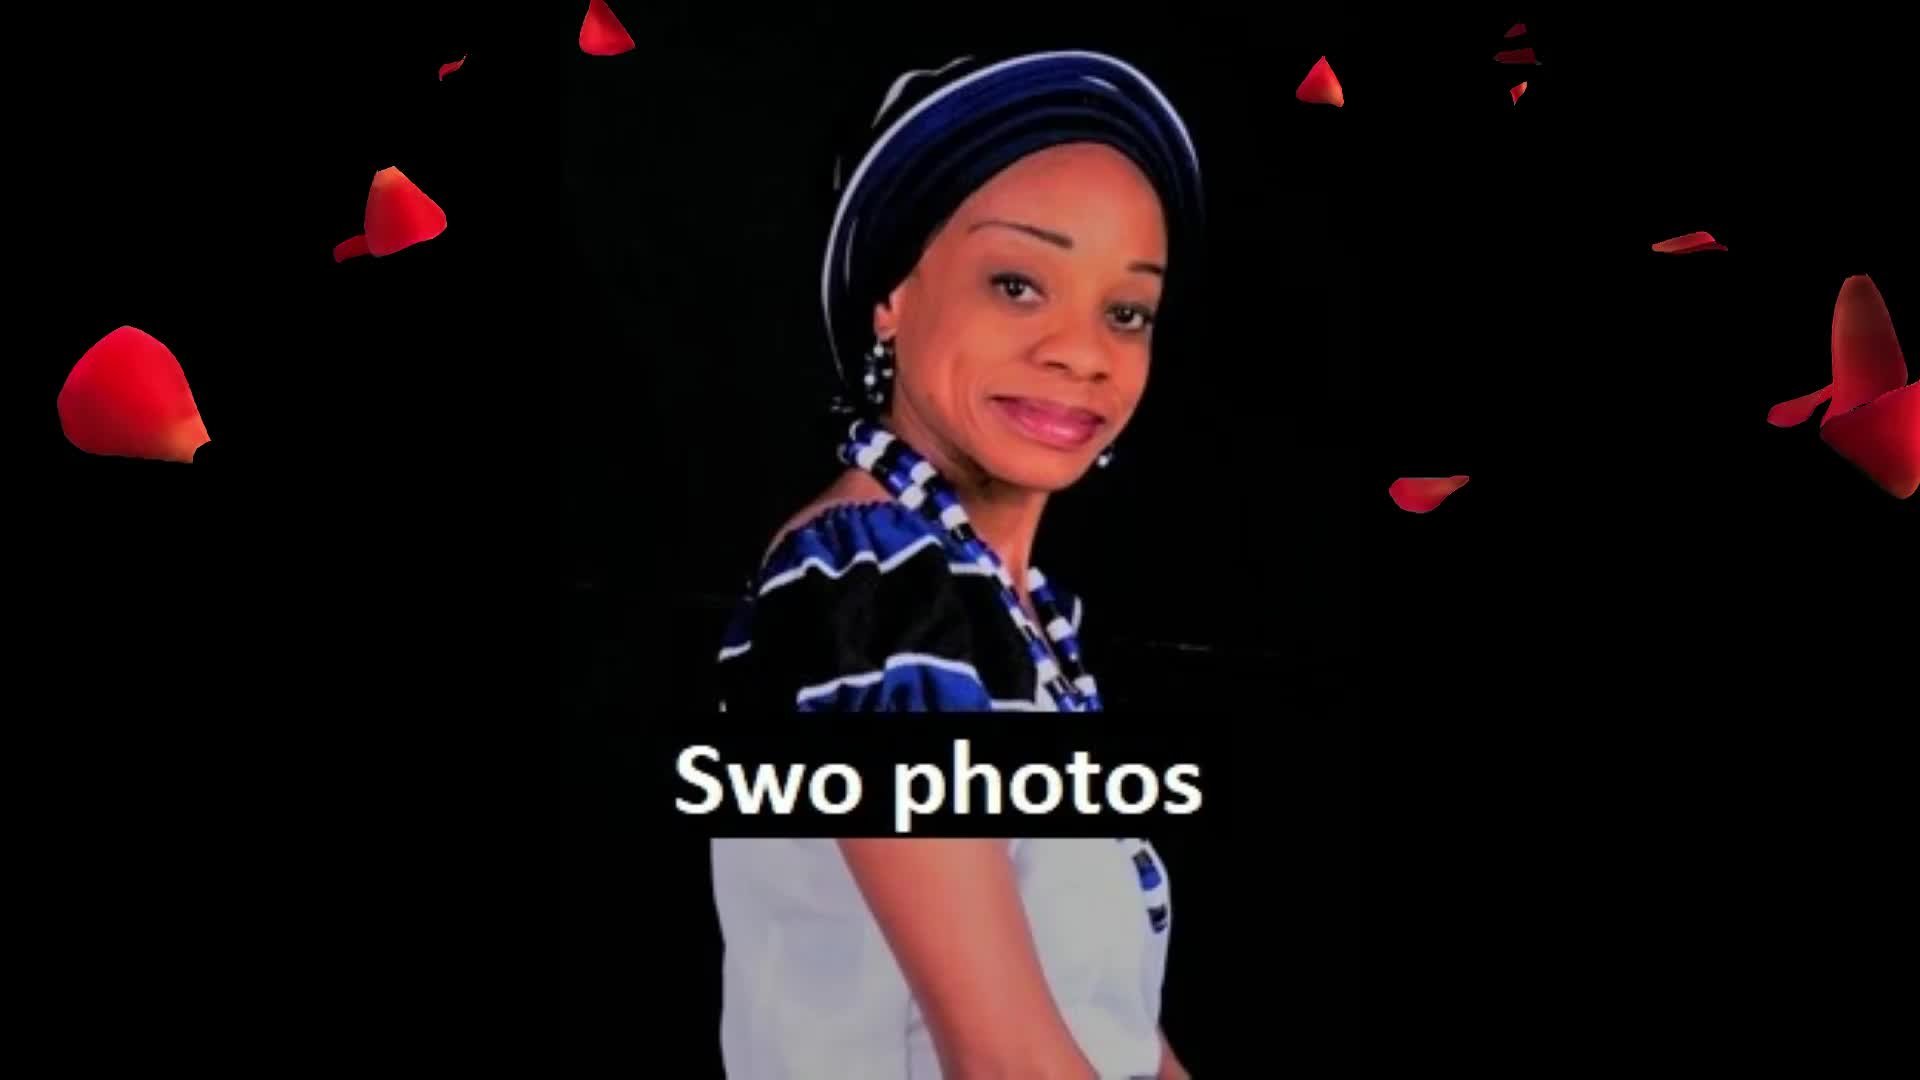 The Beautiful Swoness World Of Arts And Culture_ Ambassador of culture thumbnail